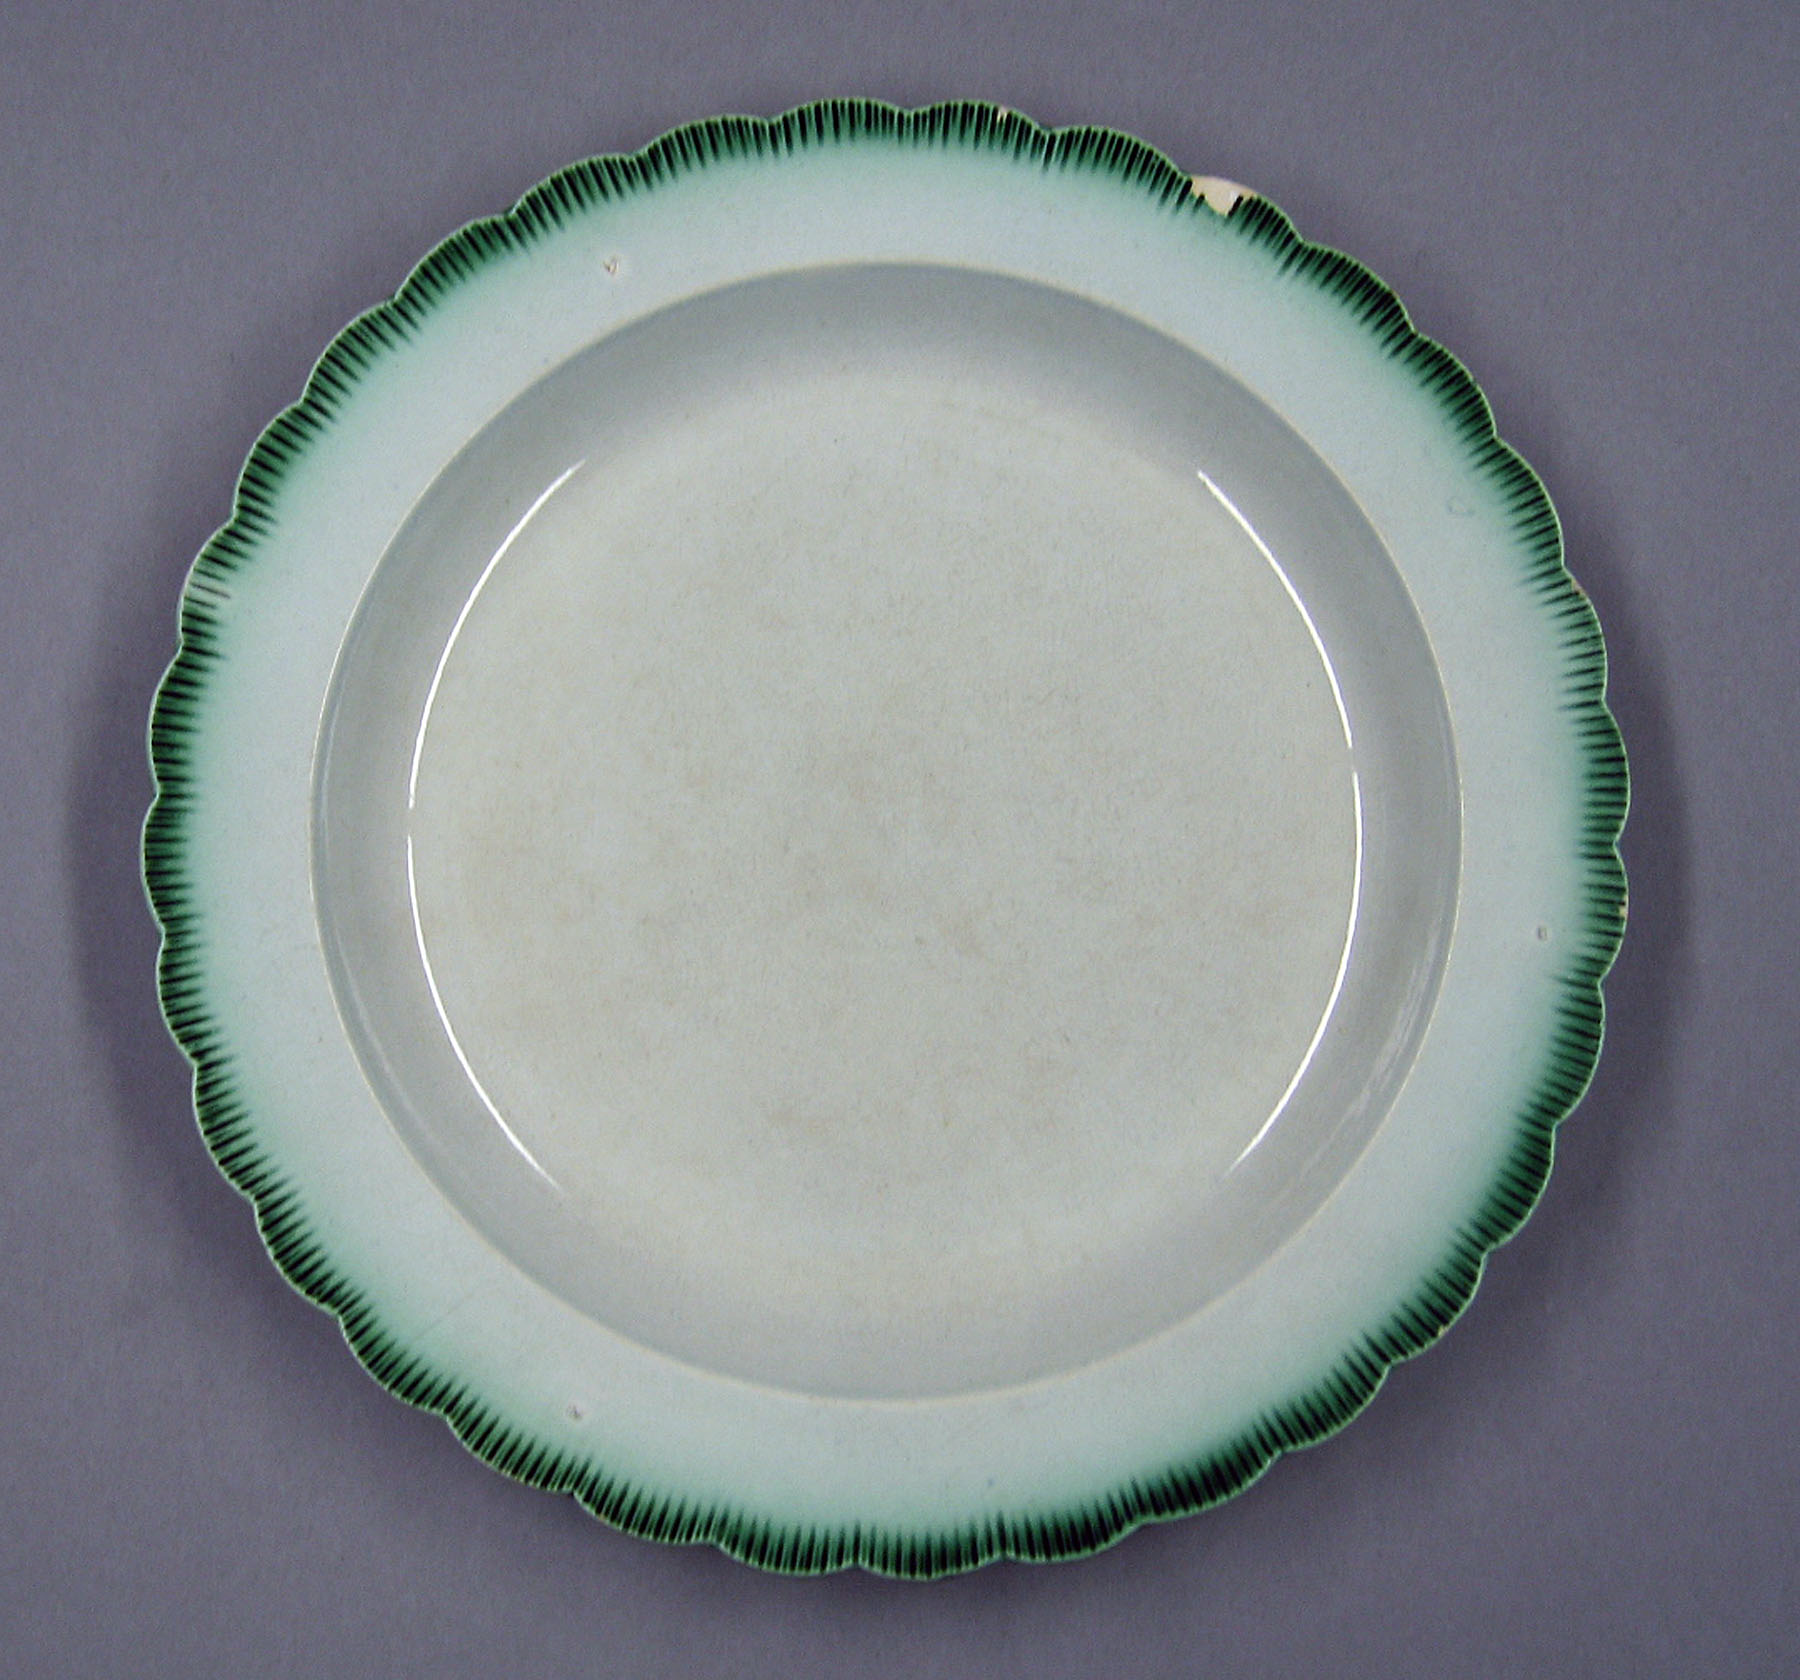 1969.0867.002 Sewell pearlware plate